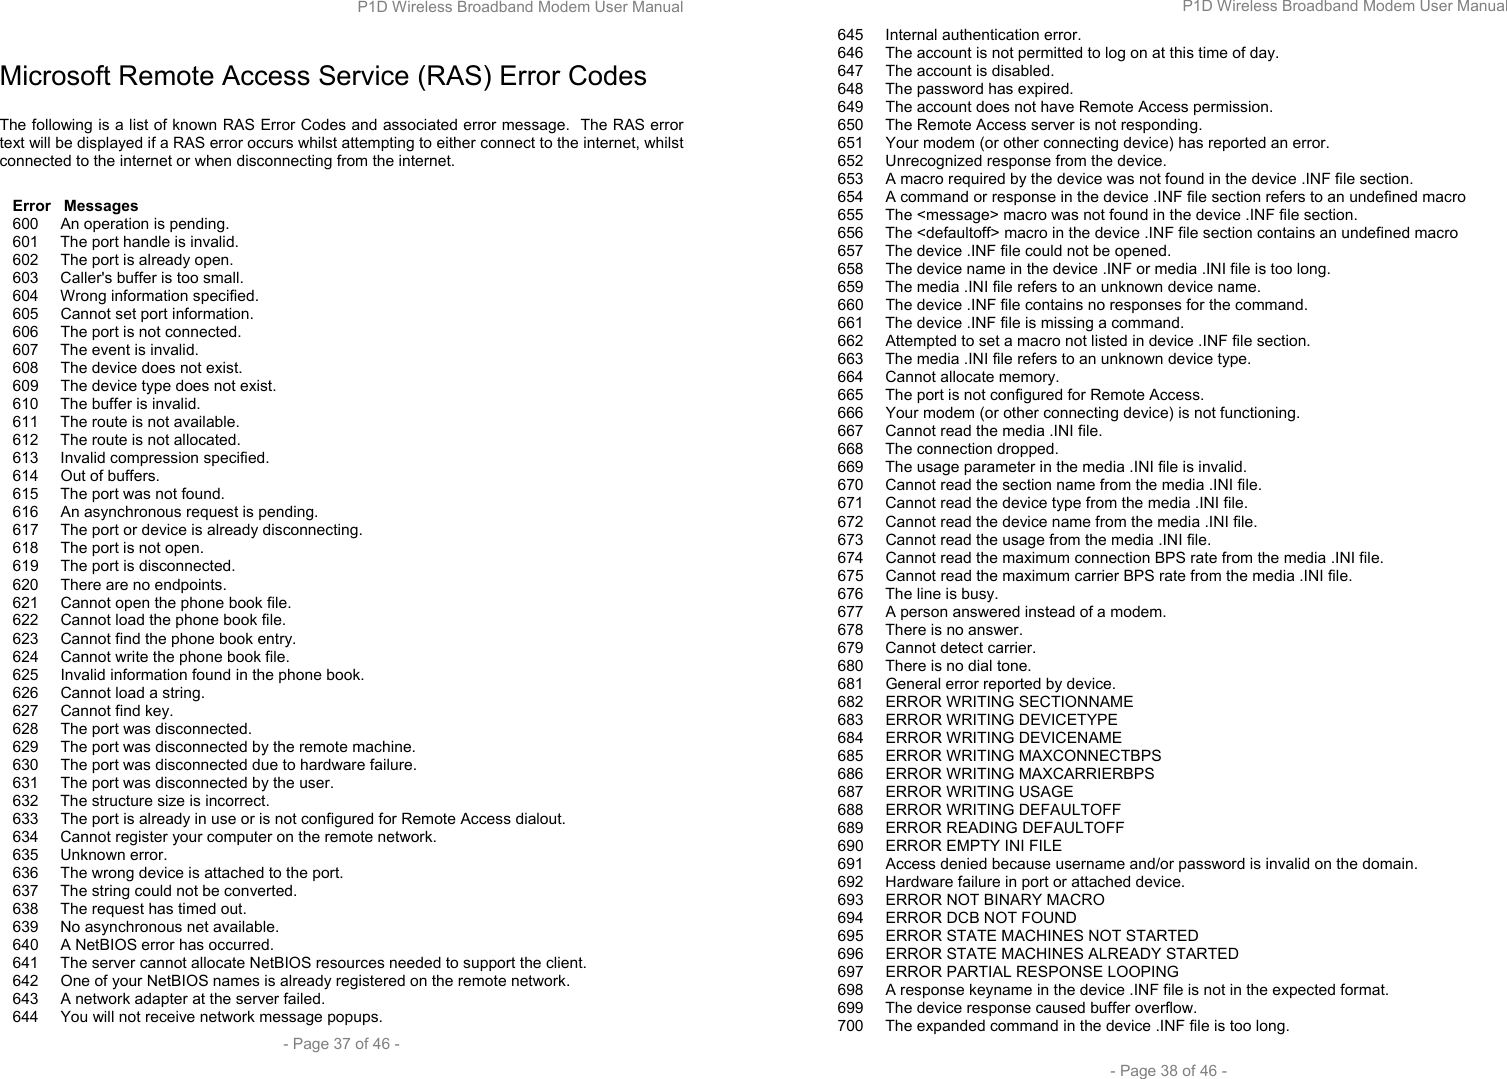 P1D Wireless Broadband Modem User Manual  - Page 37 of 46 -  Microsoft Remote Access Service (RAS) Error Codes   The following is a list of known RAS Error Codes and associated error message.  The RAS error text will be displayed if a RAS error occurs whilst attempting to either connect to the internet, whilst connected to the internet or when disconnecting from the internet.     Error   Messages    600     An operation is pending.    601     The port handle is invalid.    602     The port is already open.    603     Caller&apos;s buffer is too small.    604     Wrong information specified.    605     Cannot set port information.    606     The port is not connected.    607     The event is invalid.    608     The device does not exist.    609     The device type does not exist.    610     The buffer is invalid.    611     The route is not available.    612     The route is not allocated.    613     Invalid compression specified.    614     Out of buffers.    615     The port was not found.    616     An asynchronous request is pending.    617     The port or device is already disconnecting.    618     The port is not open.    619     The port is disconnected.    620     There are no endpoints.    621     Cannot open the phone book file.    622     Cannot load the phone book file.    623     Cannot find the phone book entry.    624     Cannot write the phone book file.    625     Invalid information found in the phone book.    626     Cannot load a string.    627     Cannot find key.    628     The port was disconnected.    629     The port was disconnected by the remote machine.    630     The port was disconnected due to hardware failure.    631     The port was disconnected by the user.    632     The structure size is incorrect.    633     The port is already in use or is not configured for Remote Access dialout.    634     Cannot register your computer on the remote network.    635     Unknown error.    636     The wrong device is attached to the port.    637     The string could not be converted.    638     The request has timed out.    639     No asynchronous net available.    640     A NetBIOS error has occurred.    641     The server cannot allocate NetBIOS resources needed to support the client.    642     One of your NetBIOS names is already registered on the remote network.    643     A network adapter at the server failed.    644     You will not receive network message popups. P1D Wireless Broadband Modem User Manual  - Page 38 of 46 -    645     Internal authentication error.    646     The account is not permitted to log on at this time of day.    647     The account is disabled.    648     The password has expired.    649     The account does not have Remote Access permission.    650     The Remote Access server is not responding.    651     Your modem (or other connecting device) has reported an error.    652     Unrecognized response from the device.    653     A macro required by the device was not found in the device .INF file section.    654     A command or response in the device .INF file section refers to an undefined macro    655     The &lt;message&gt; macro was not found in the device .INF file section.    656     The &lt;defaultoff&gt; macro in the device .INF file section contains an undefined macro    657     The device .INF file could not be opened.    658     The device name in the device .INF or media .INI file is too long.    659     The media .INI file refers to an unknown device name.    660     The device .INF file contains no responses for the command.    661     The device .INF file is missing a command.    662     Attempted to set a macro not listed in device .INF file section.    663     The media .INI file refers to an unknown device type.    664     Cannot allocate memory.    665     The port is not configured for Remote Access.    666     Your modem (or other connecting device) is not functioning.    667     Cannot read the media .INI file.    668     The connection dropped.    669     The usage parameter in the media .INI file is invalid.    670     Cannot read the section name from the media .INI file.    671     Cannot read the device type from the media .INI file.    672     Cannot read the device name from the media .INI file.    673     Cannot read the usage from the media .INI file.    674     Cannot read the maximum connection BPS rate from the media .INI file.    675     Cannot read the maximum carrier BPS rate from the media .INI file.    676     The line is busy.    677     A person answered instead of a modem.    678     There is no answer.    679     Cannot detect carrier.    680     There is no dial tone.    681     General error reported by device.    682     ERROR WRITING SECTIONNAME    683     ERROR WRITING DEVICETYPE    684     ERROR WRITING DEVICENAME    685     ERROR WRITING MAXCONNECTBPS    686     ERROR WRITING MAXCARRIERBPS    687     ERROR WRITING USAGE    688     ERROR WRITING DEFAULTOFF    689     ERROR READING DEFAULTOFF    690     ERROR EMPTY INI FILE    691     Access denied because username and/or password is invalid on the domain.    692     Hardware failure in port or attached device.    693     ERROR NOT BINARY MACRO    694     ERROR DCB NOT FOUND    695     ERROR STATE MACHINES NOT STARTED    696     ERROR STATE MACHINES ALREADY STARTED    697     ERROR PARTIAL RESPONSE LOOPING    698     A response keyname in the device .INF file is not in the expected format.    699     The device response caused buffer overflow.    700     The expanded command in the device .INF file is too long. 